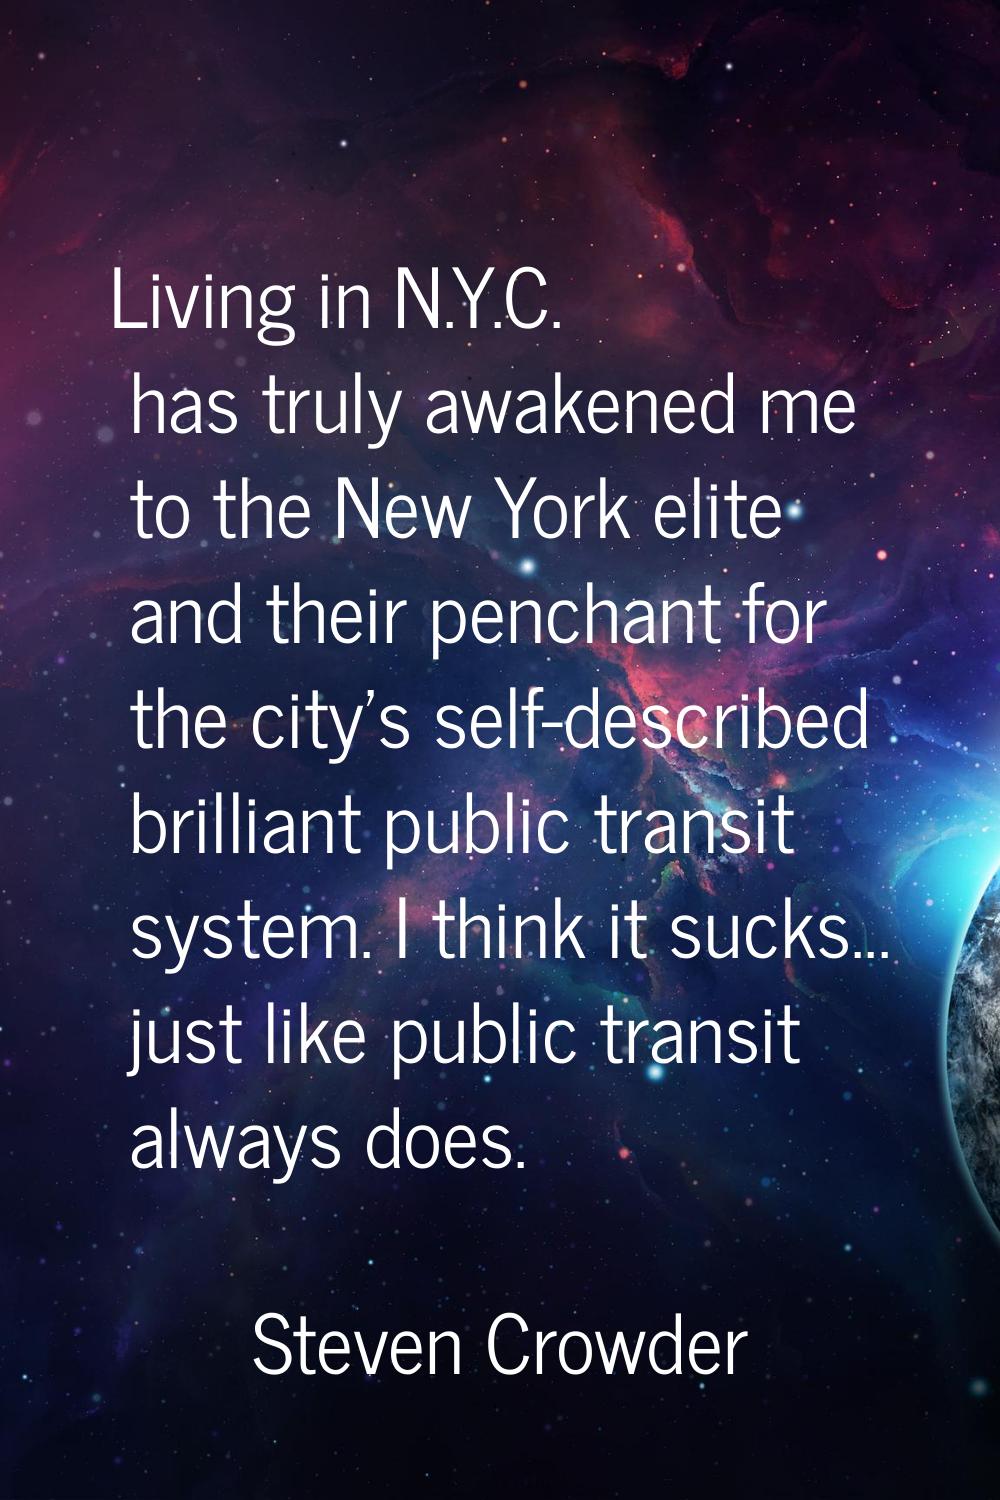 Living in N.Y.C. has truly awakened me to the New York elite and their penchant for the city's self